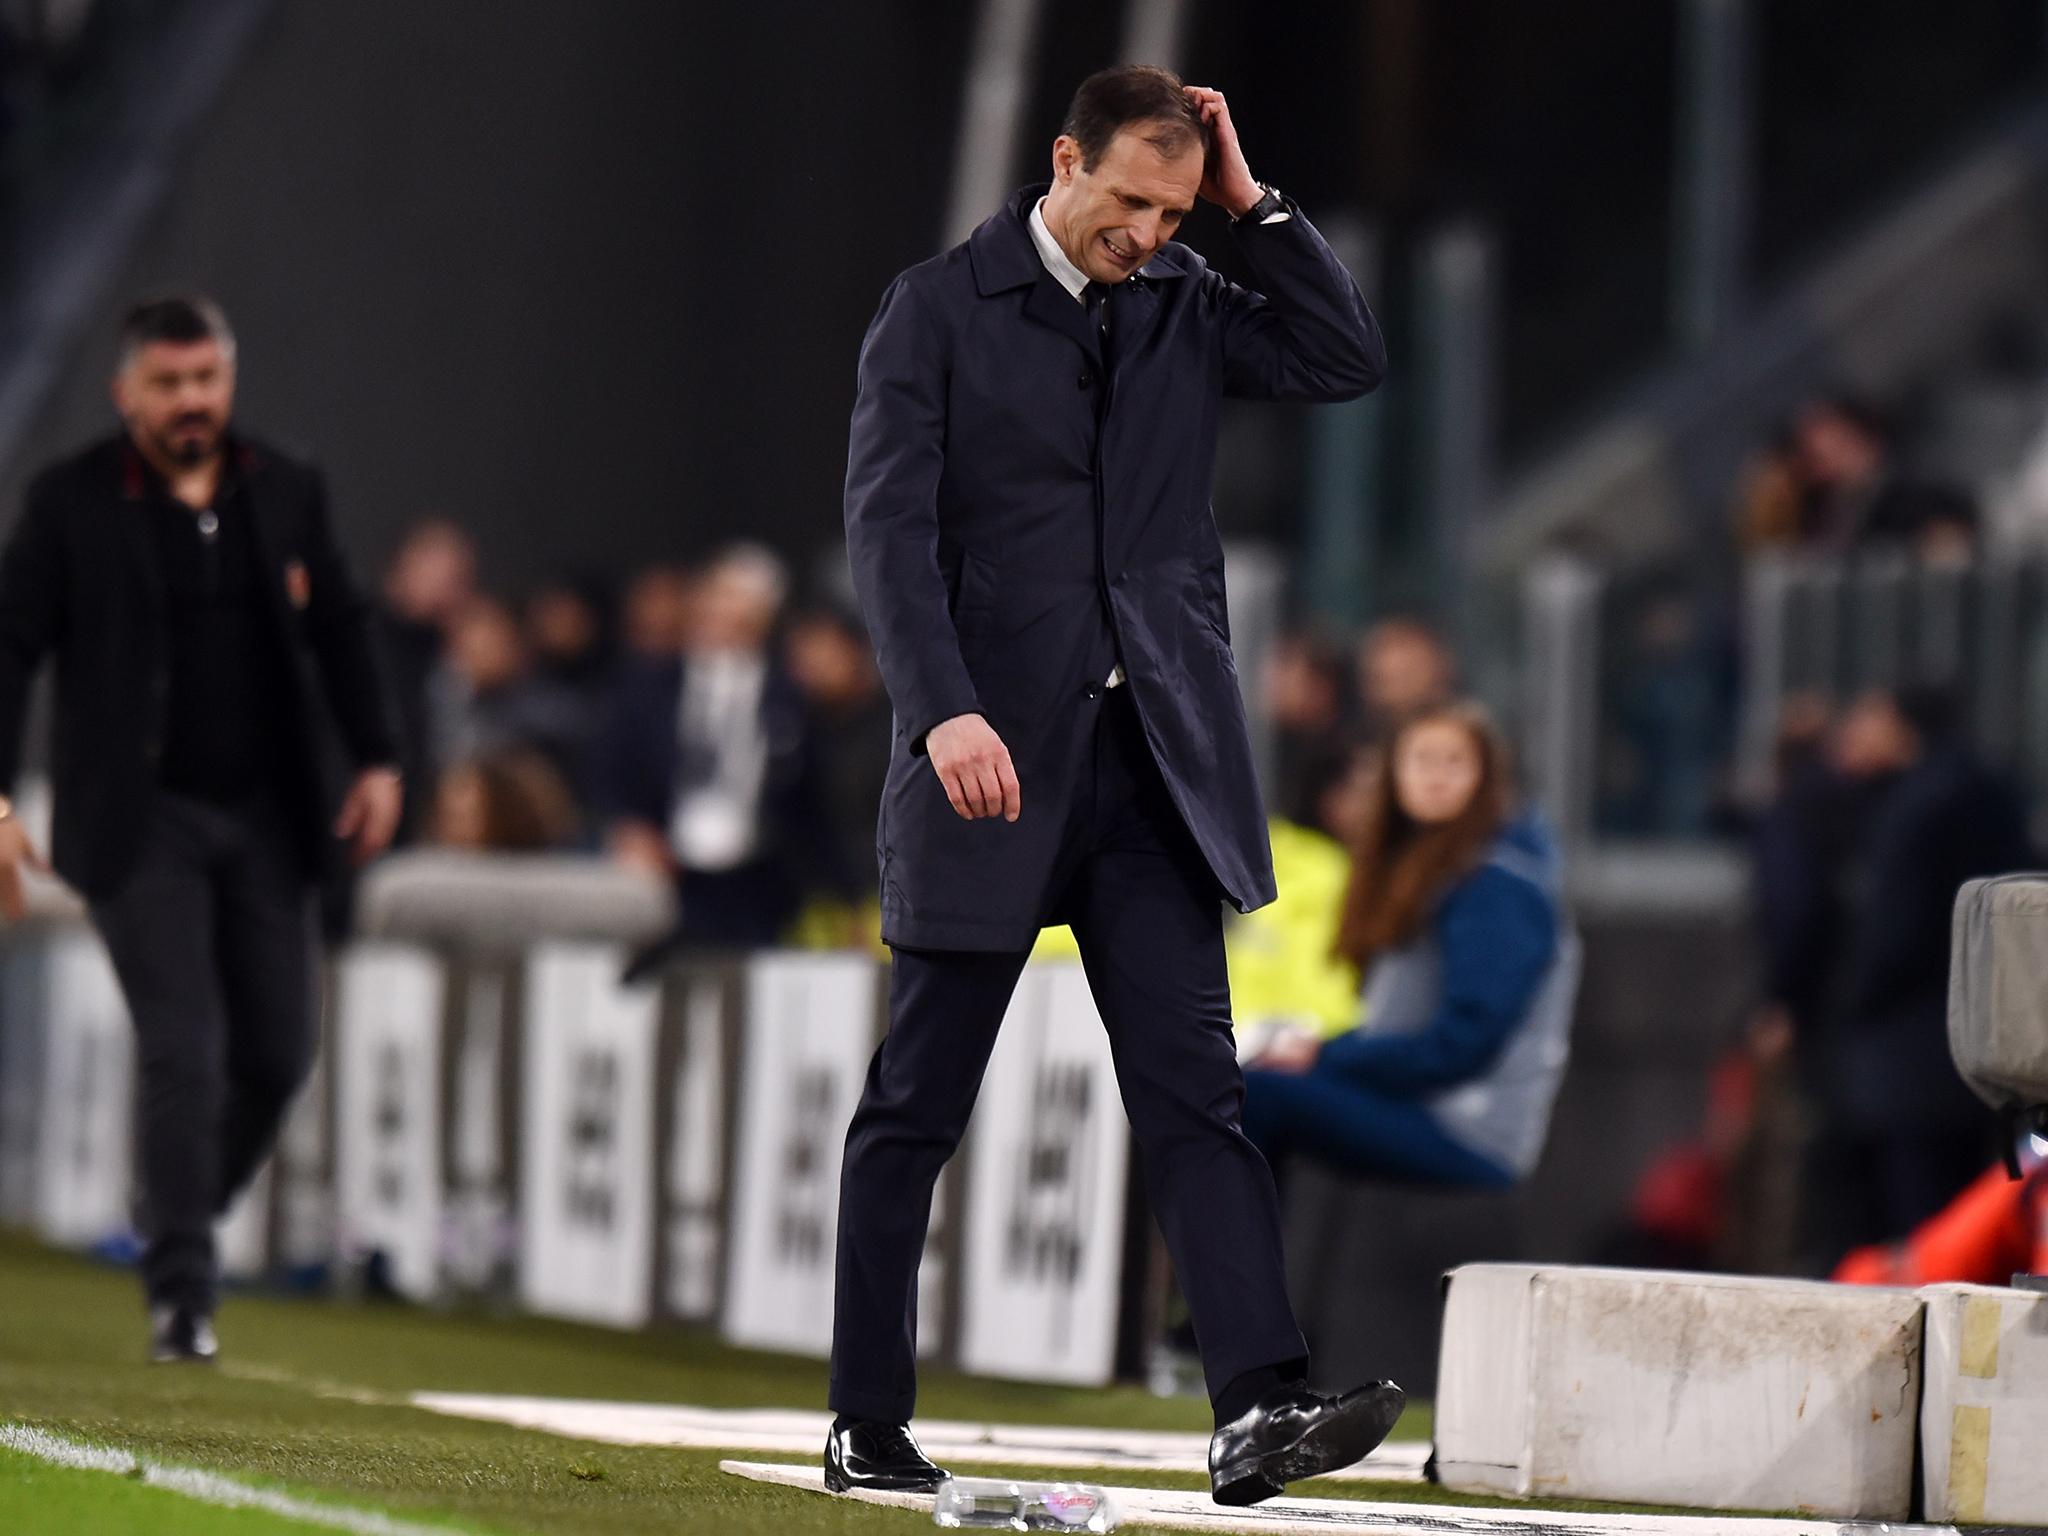 Massimo Allegri believes the tie against Real Madrid is already over after the 3-0 defeat